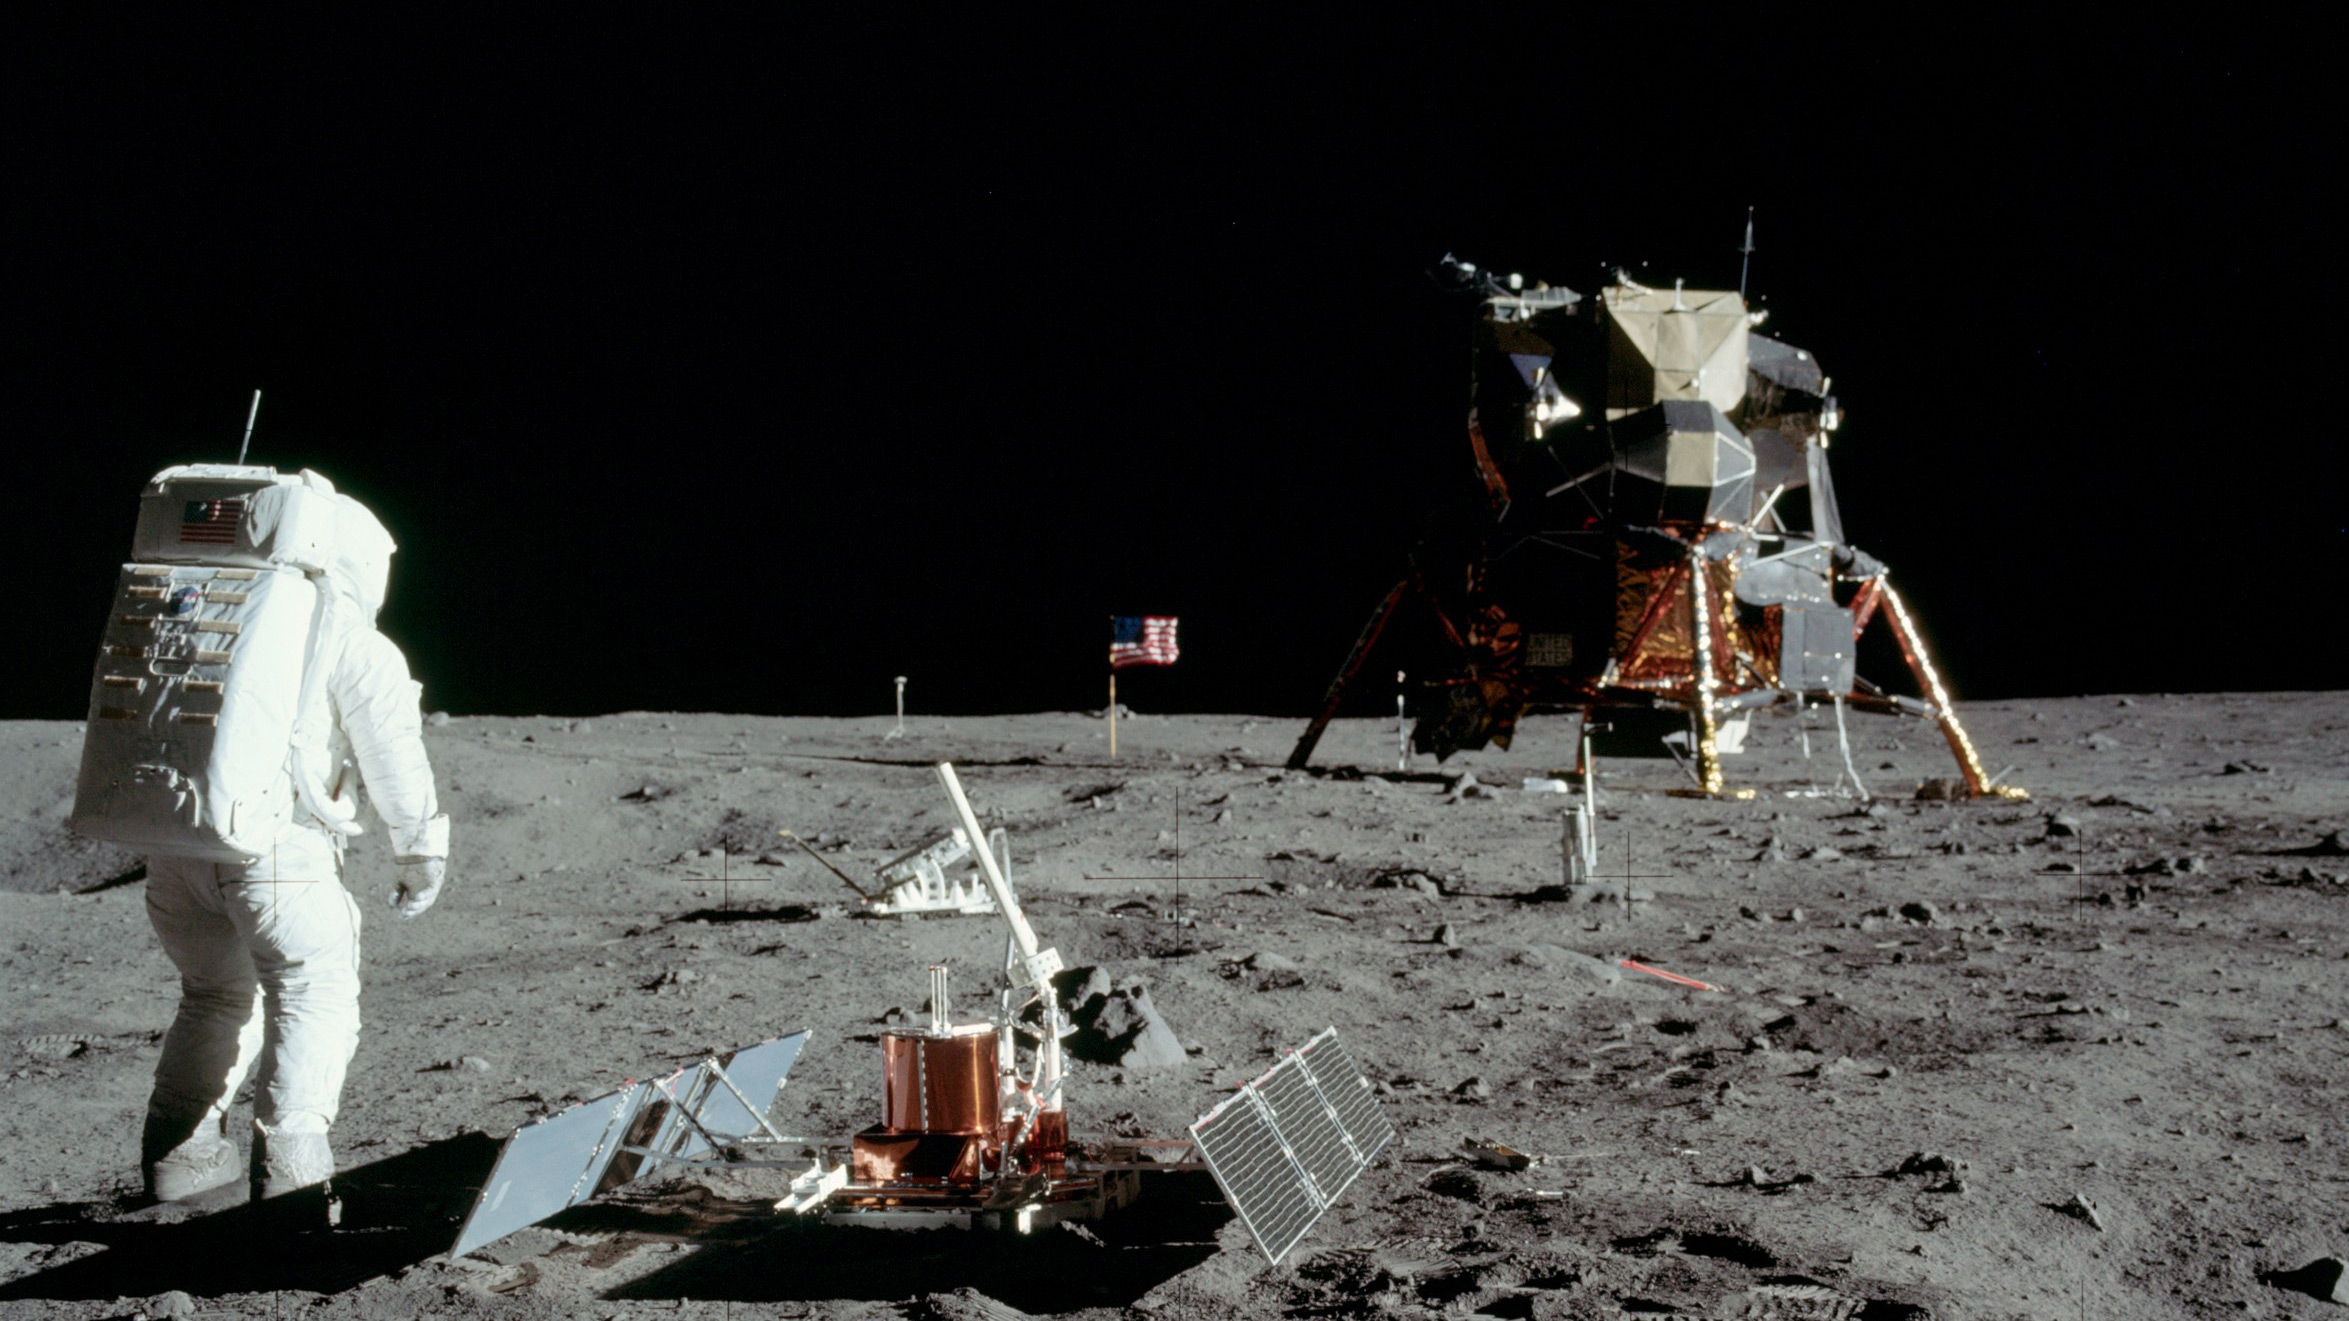 Buzz Aldrin on the moon with Landing Capsule in the background and technology experiment in the front.